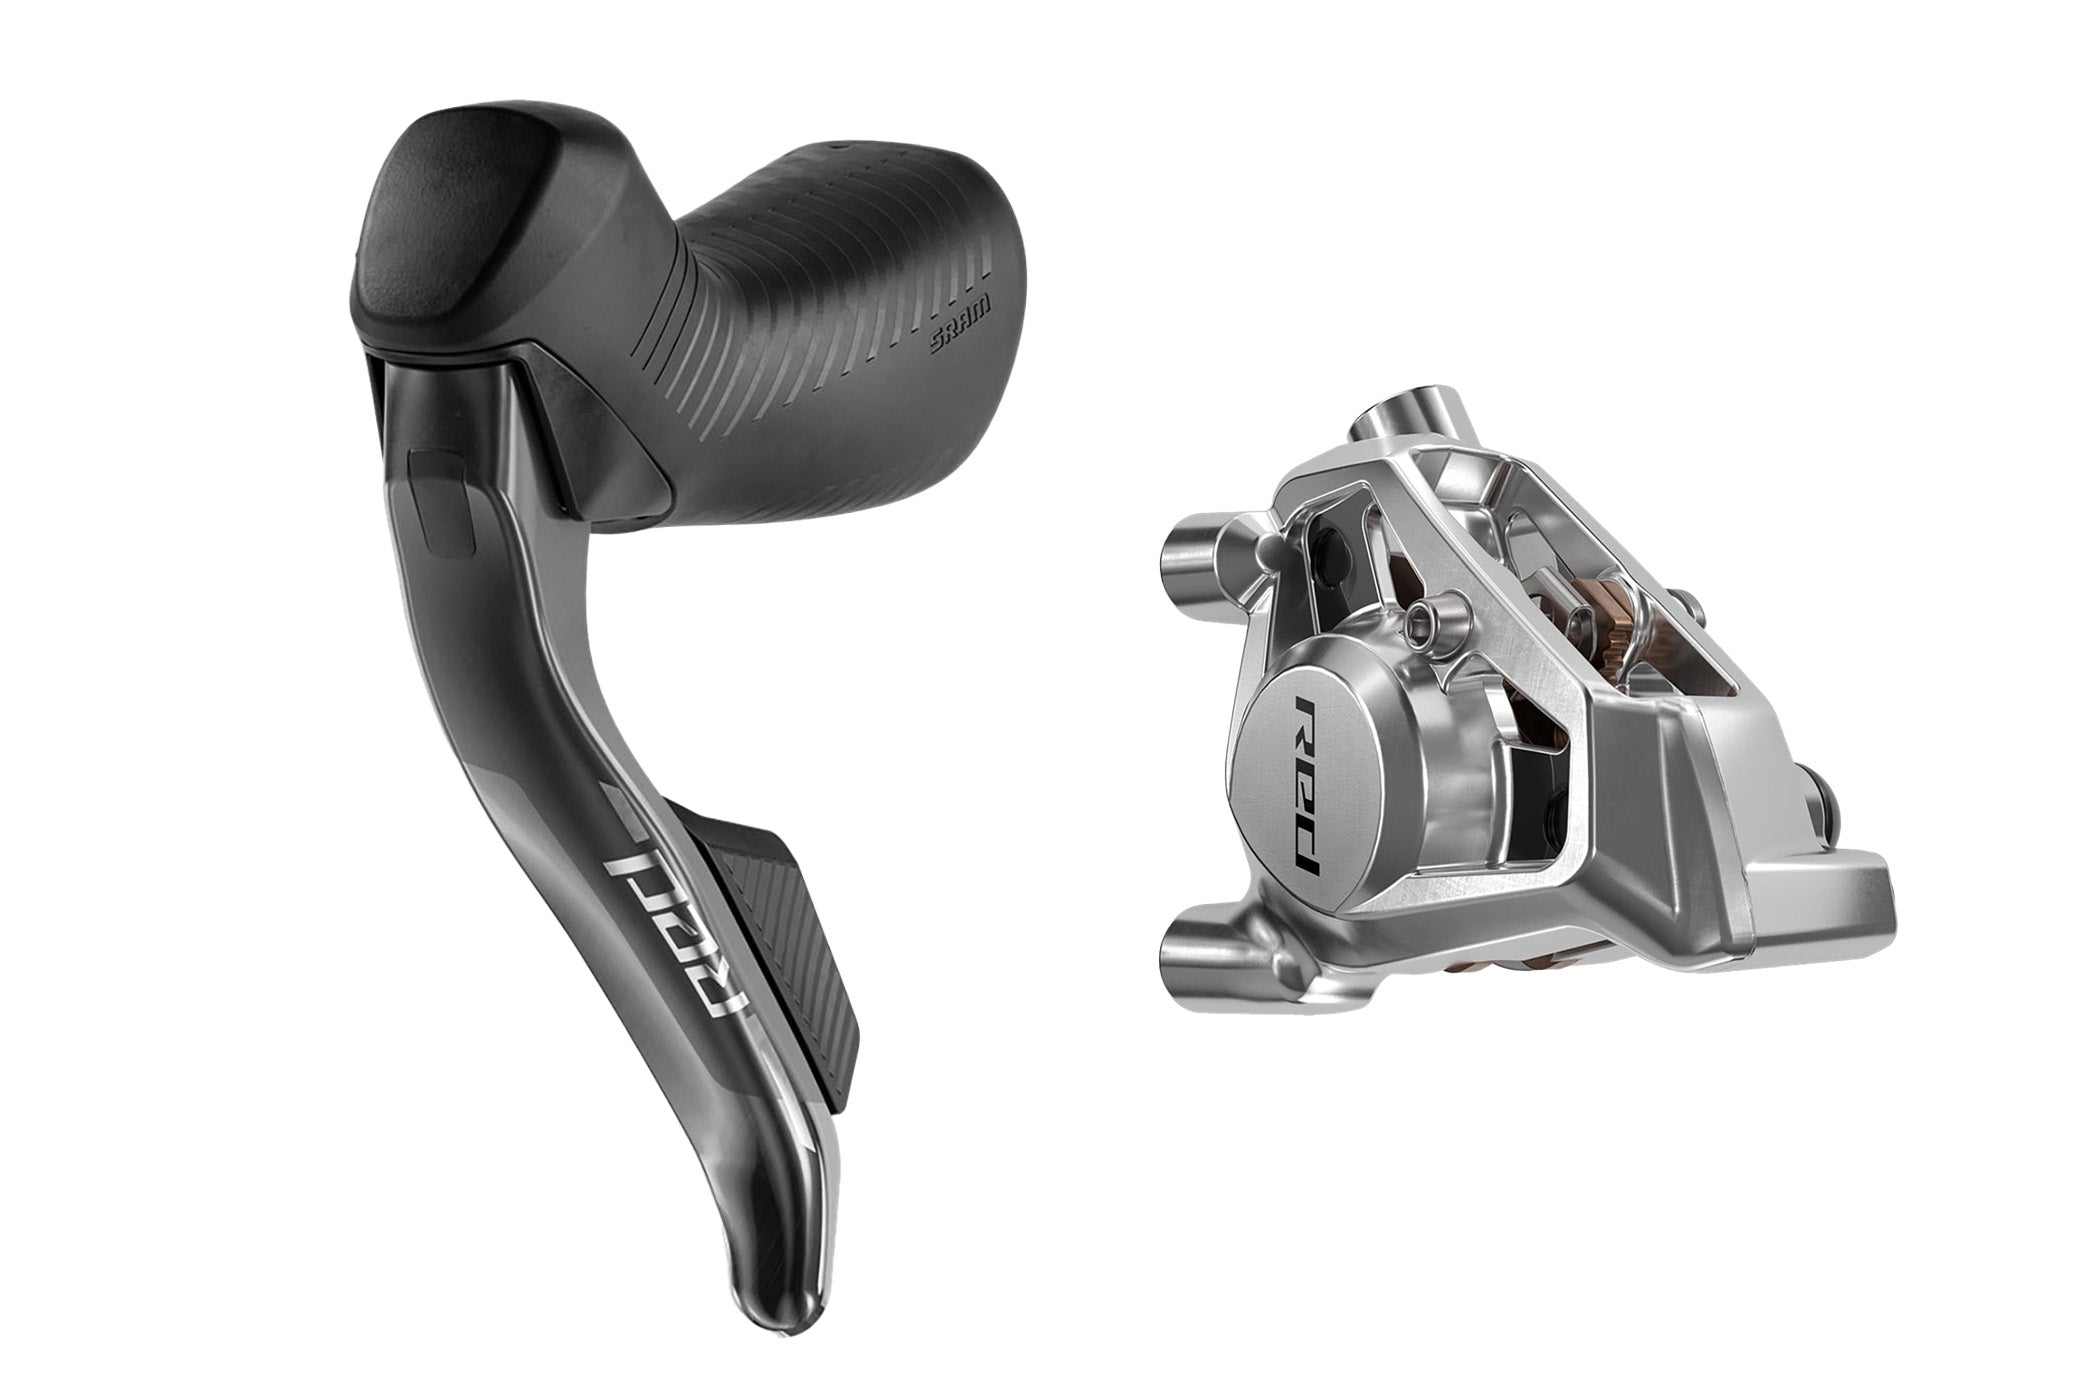 SRAM RED AXS E1 Hydraulic Left/Front Shifter/Brake 12 Speed